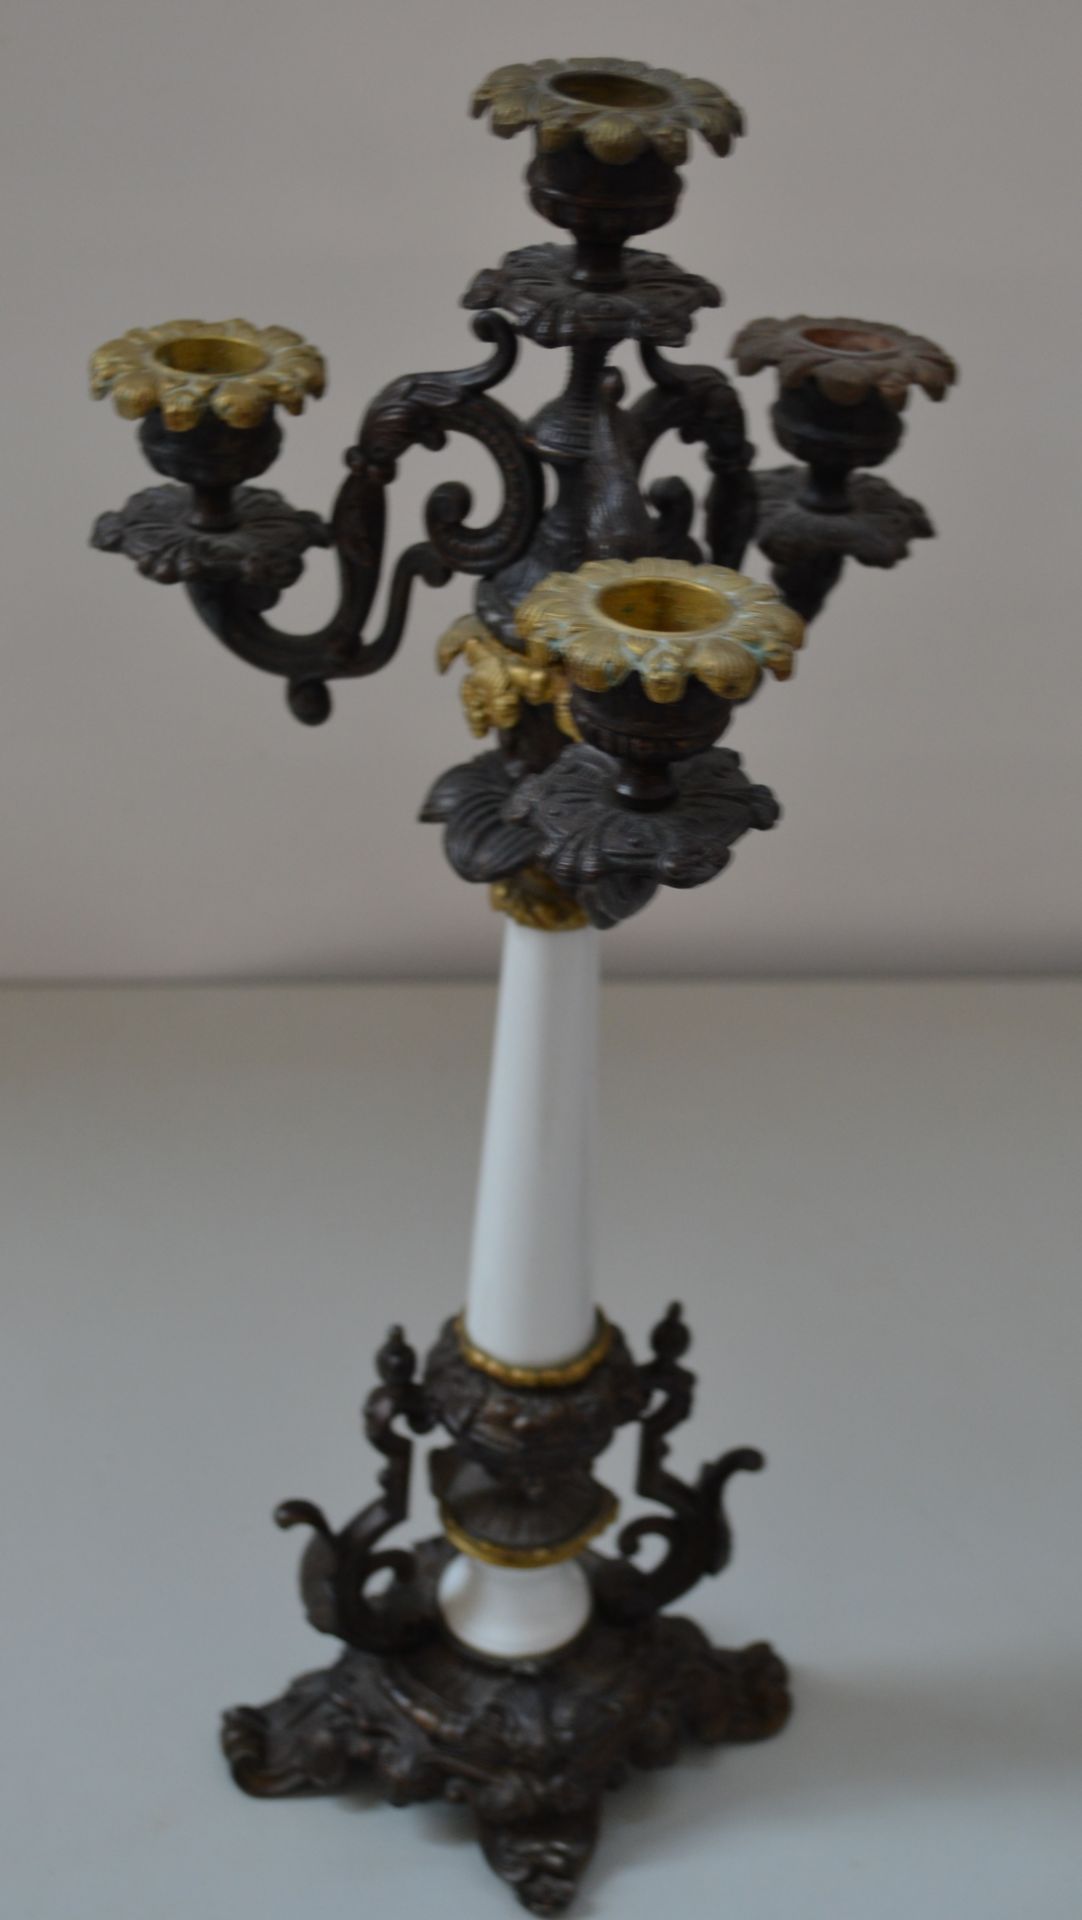 1 x A Pair Antique Candlesticks Holders - H45/W15cm - Ref J2175 - CL314 - Image 3 of 3